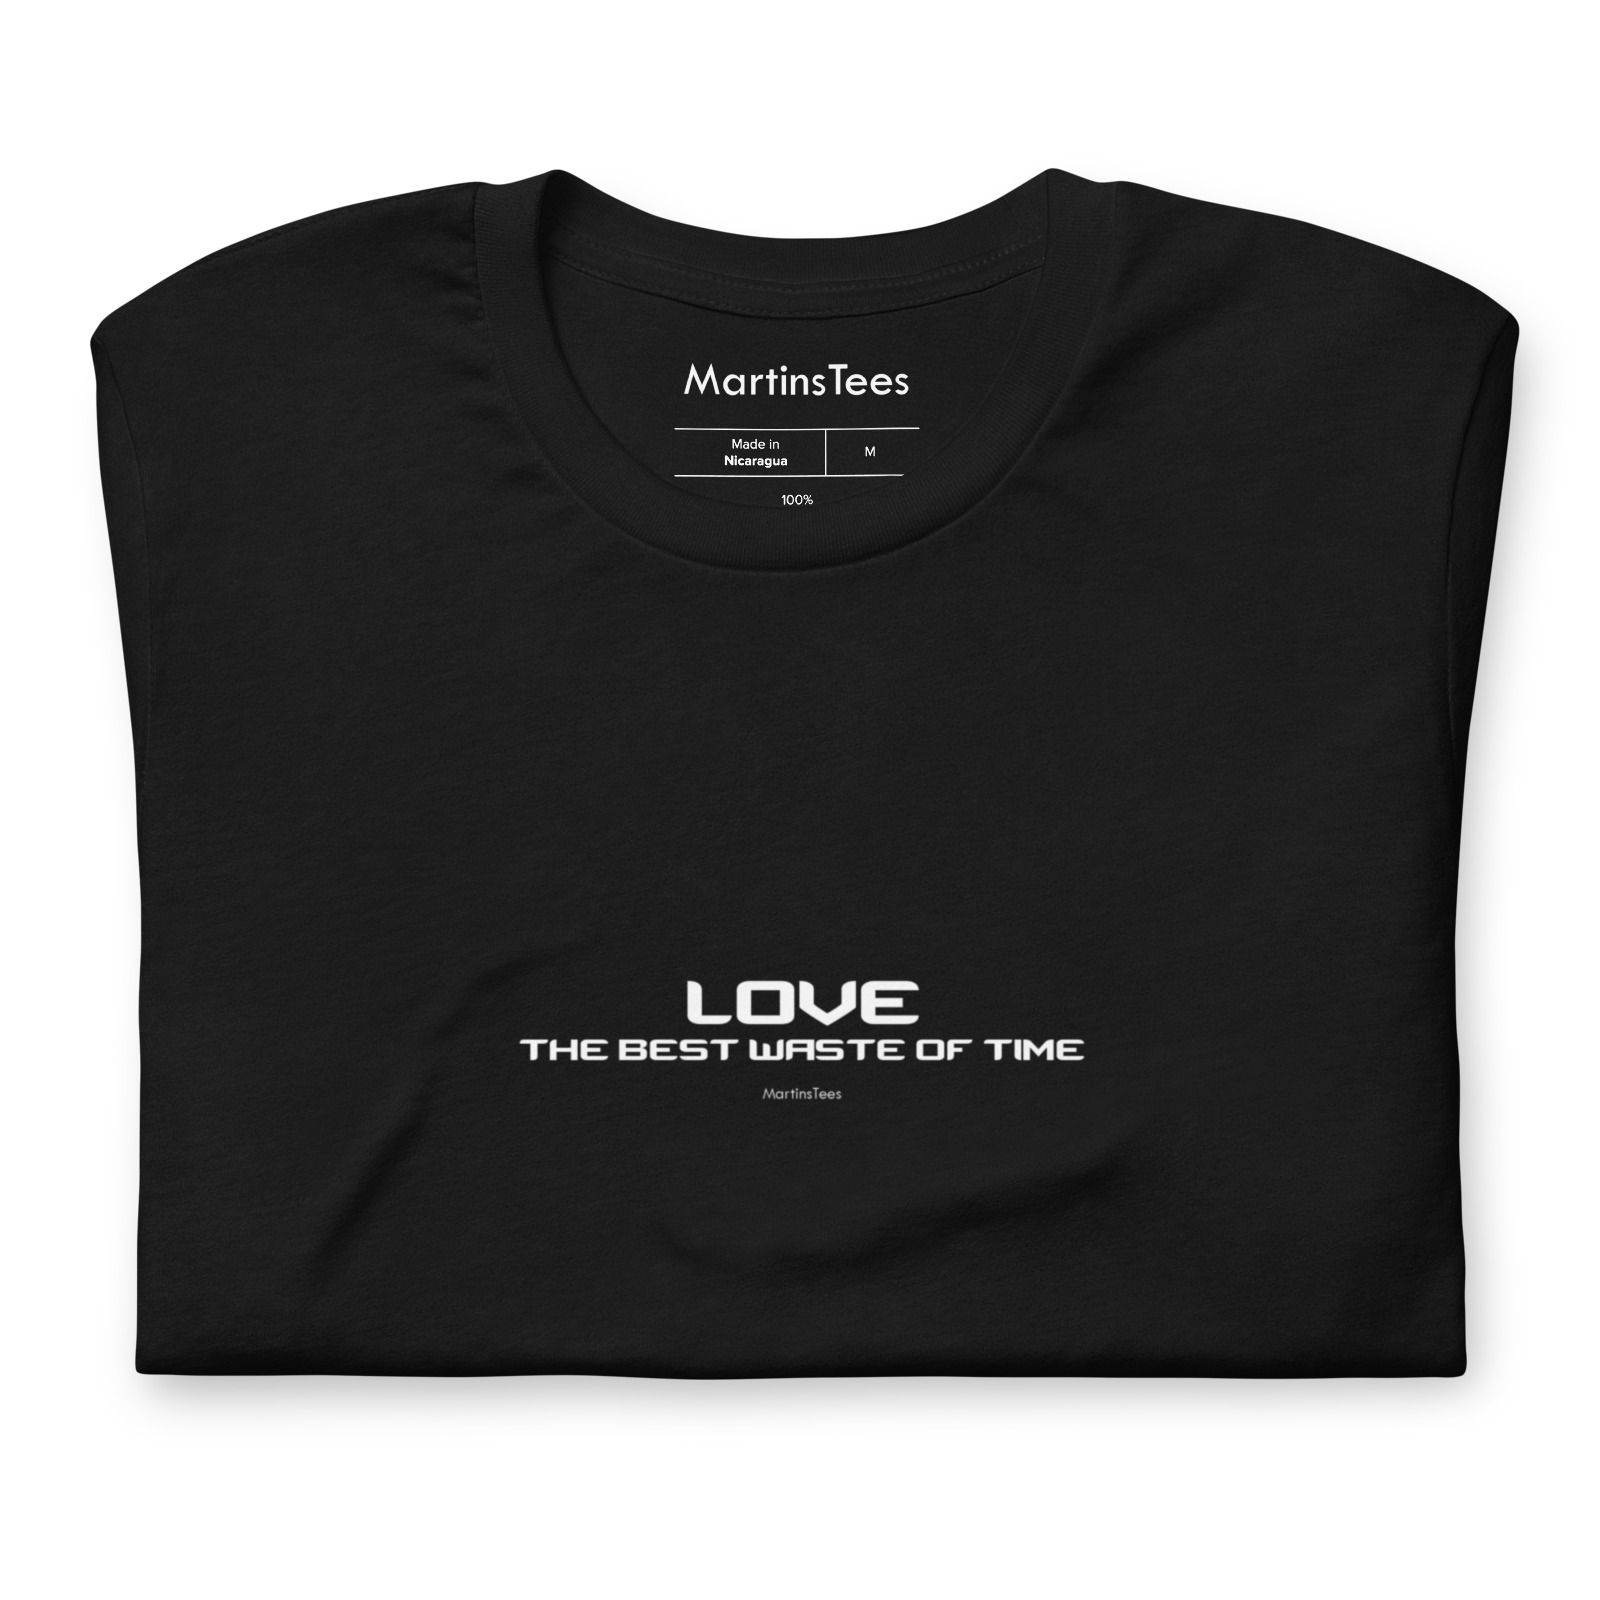 T-shirt: LOVE - THE BEST WASTE OF TIME